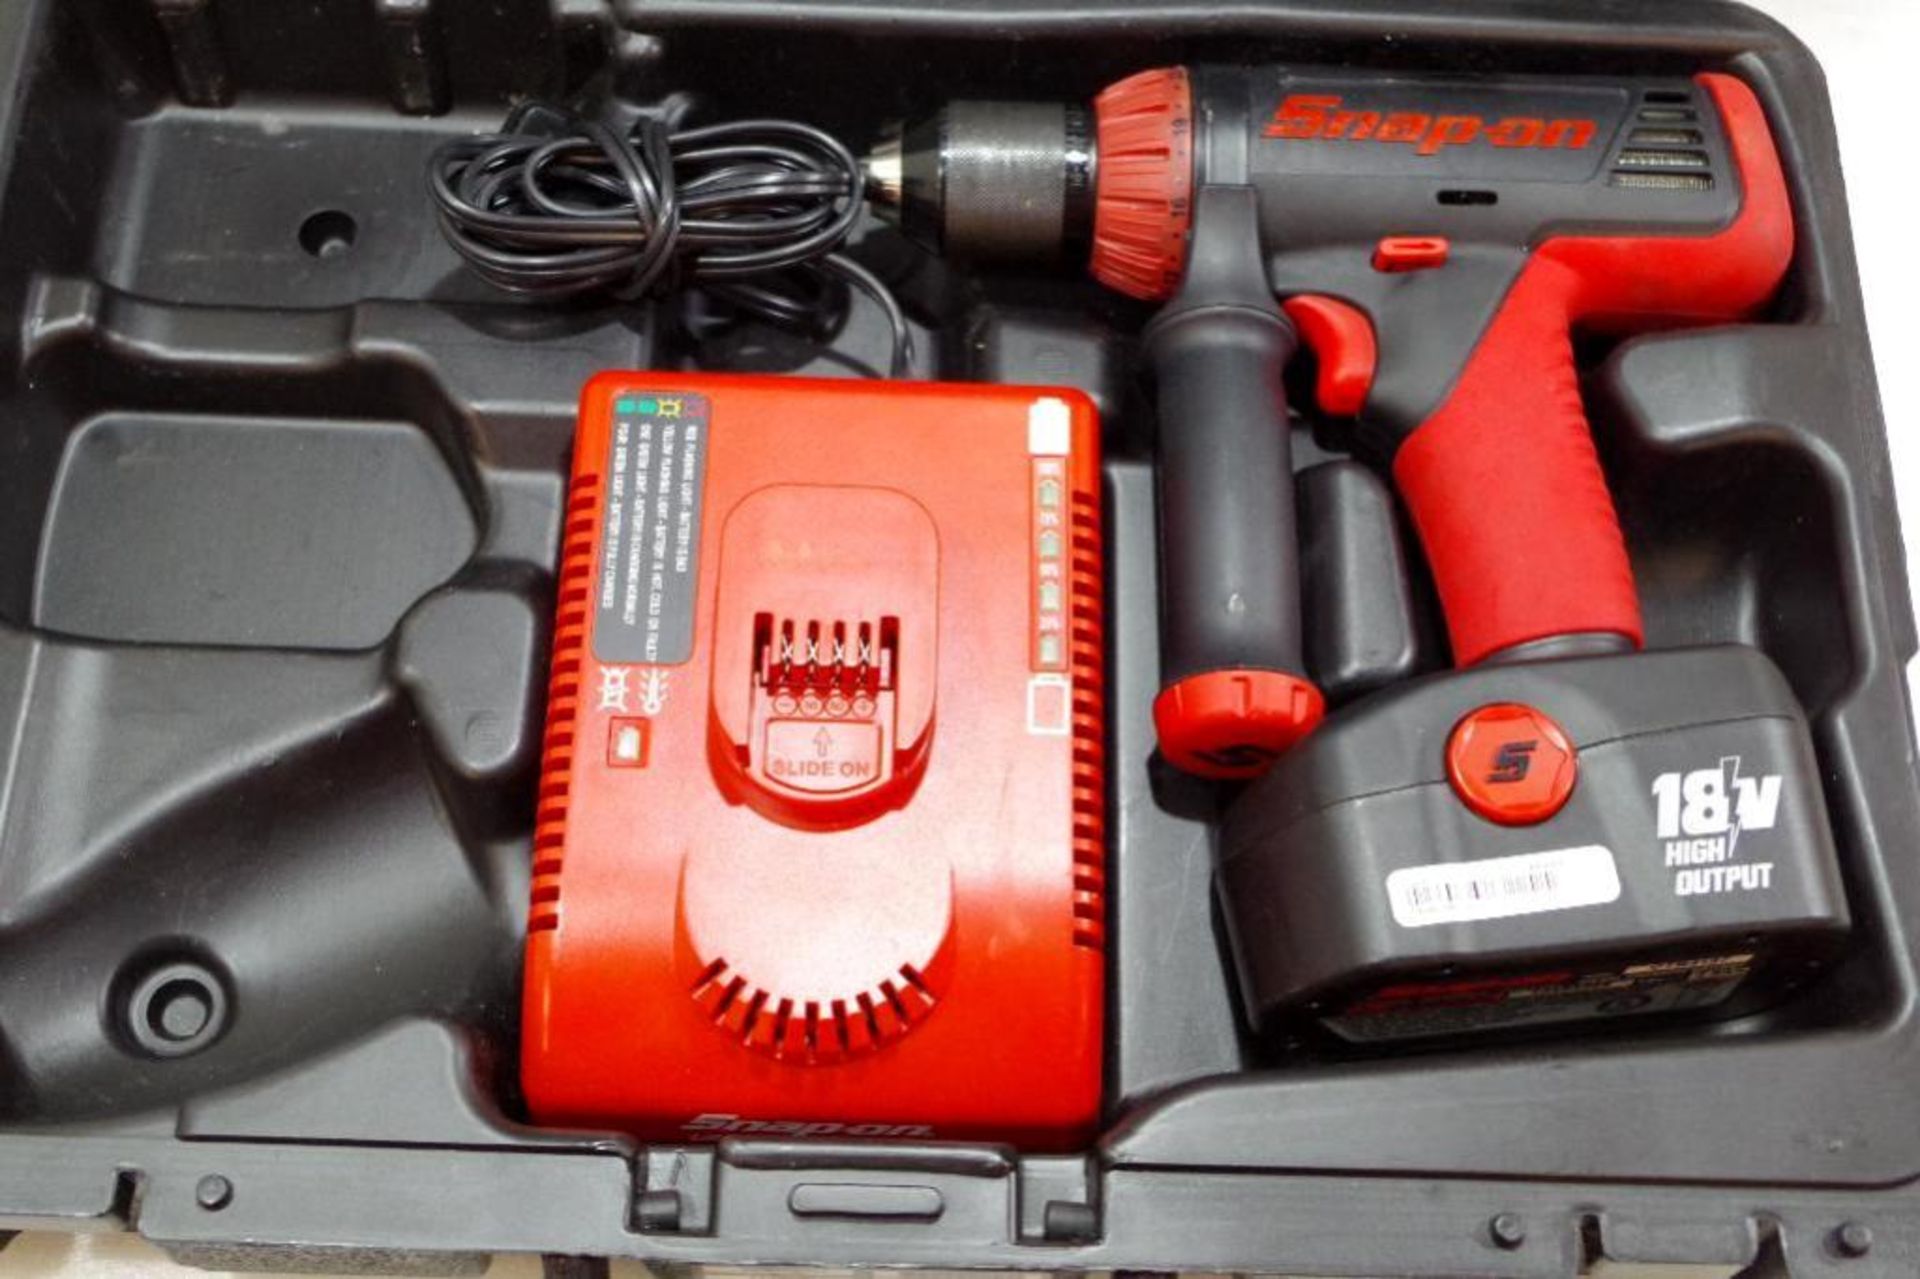 SNAP-ON 18V 1/2" Drill/Driver, Battery, Charger & Case - Image 2 of 5